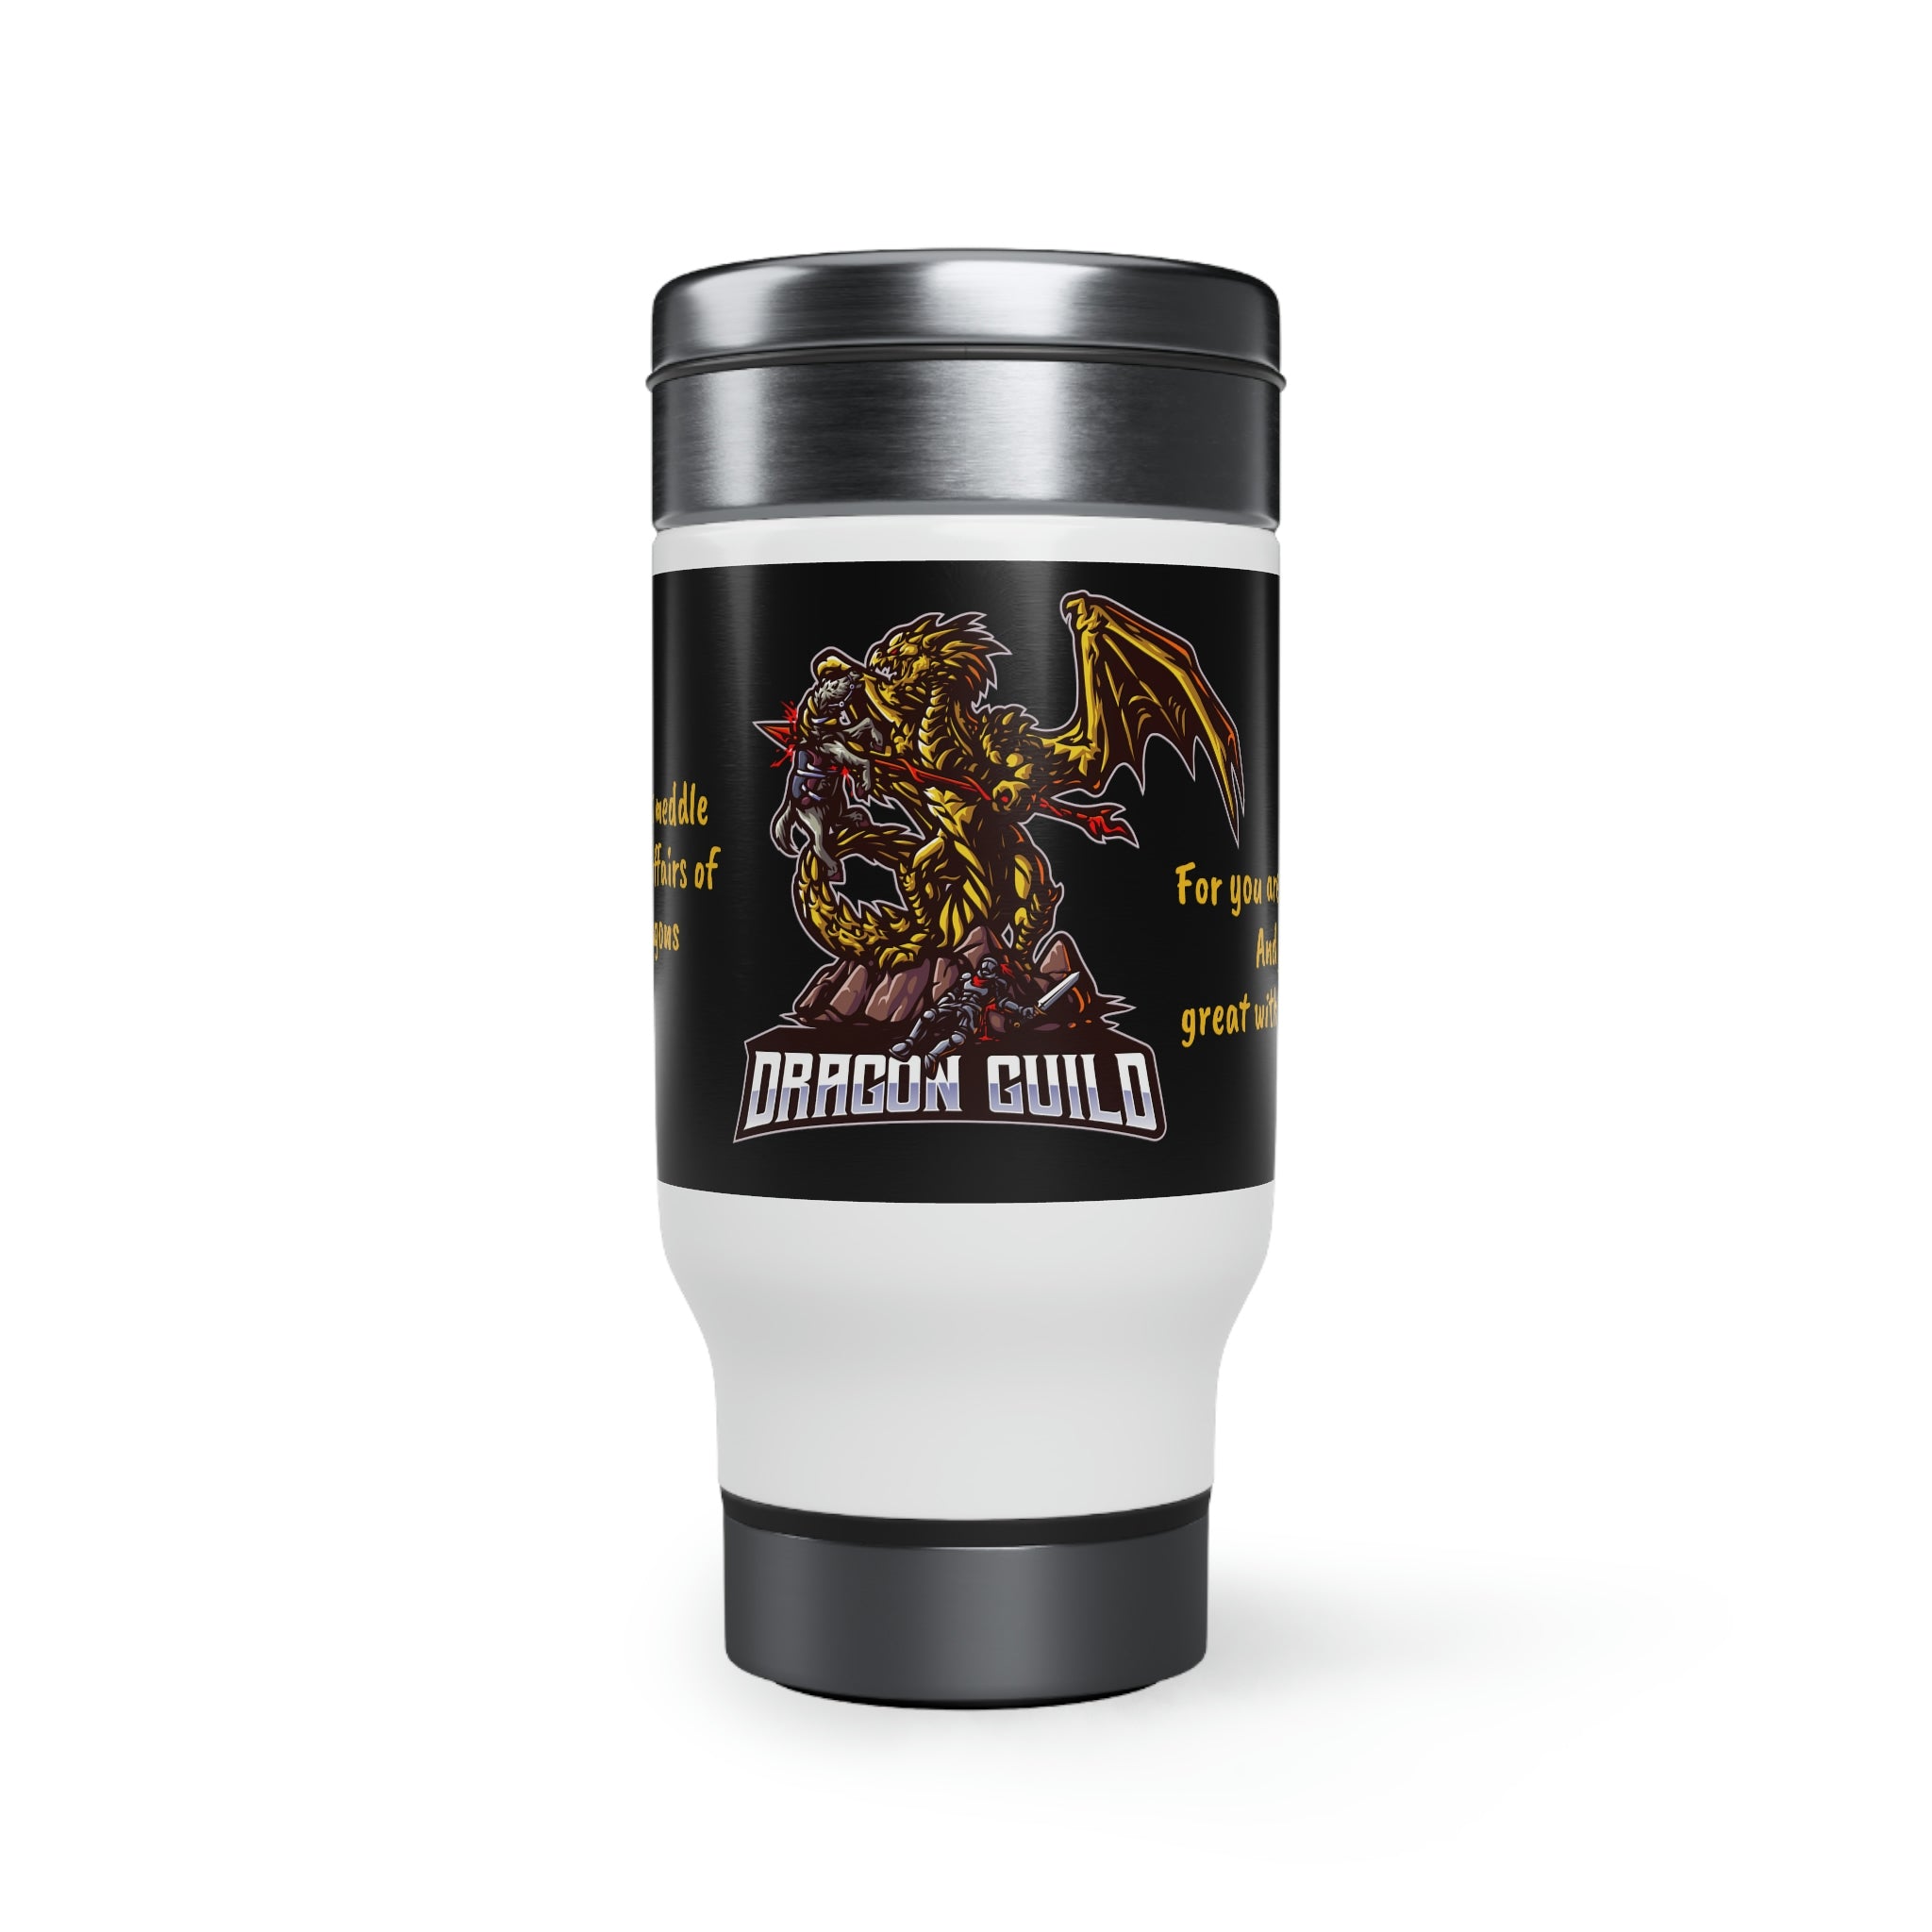 Dragon Guild Stainless Steel Travel Mug with Handle, 14oz